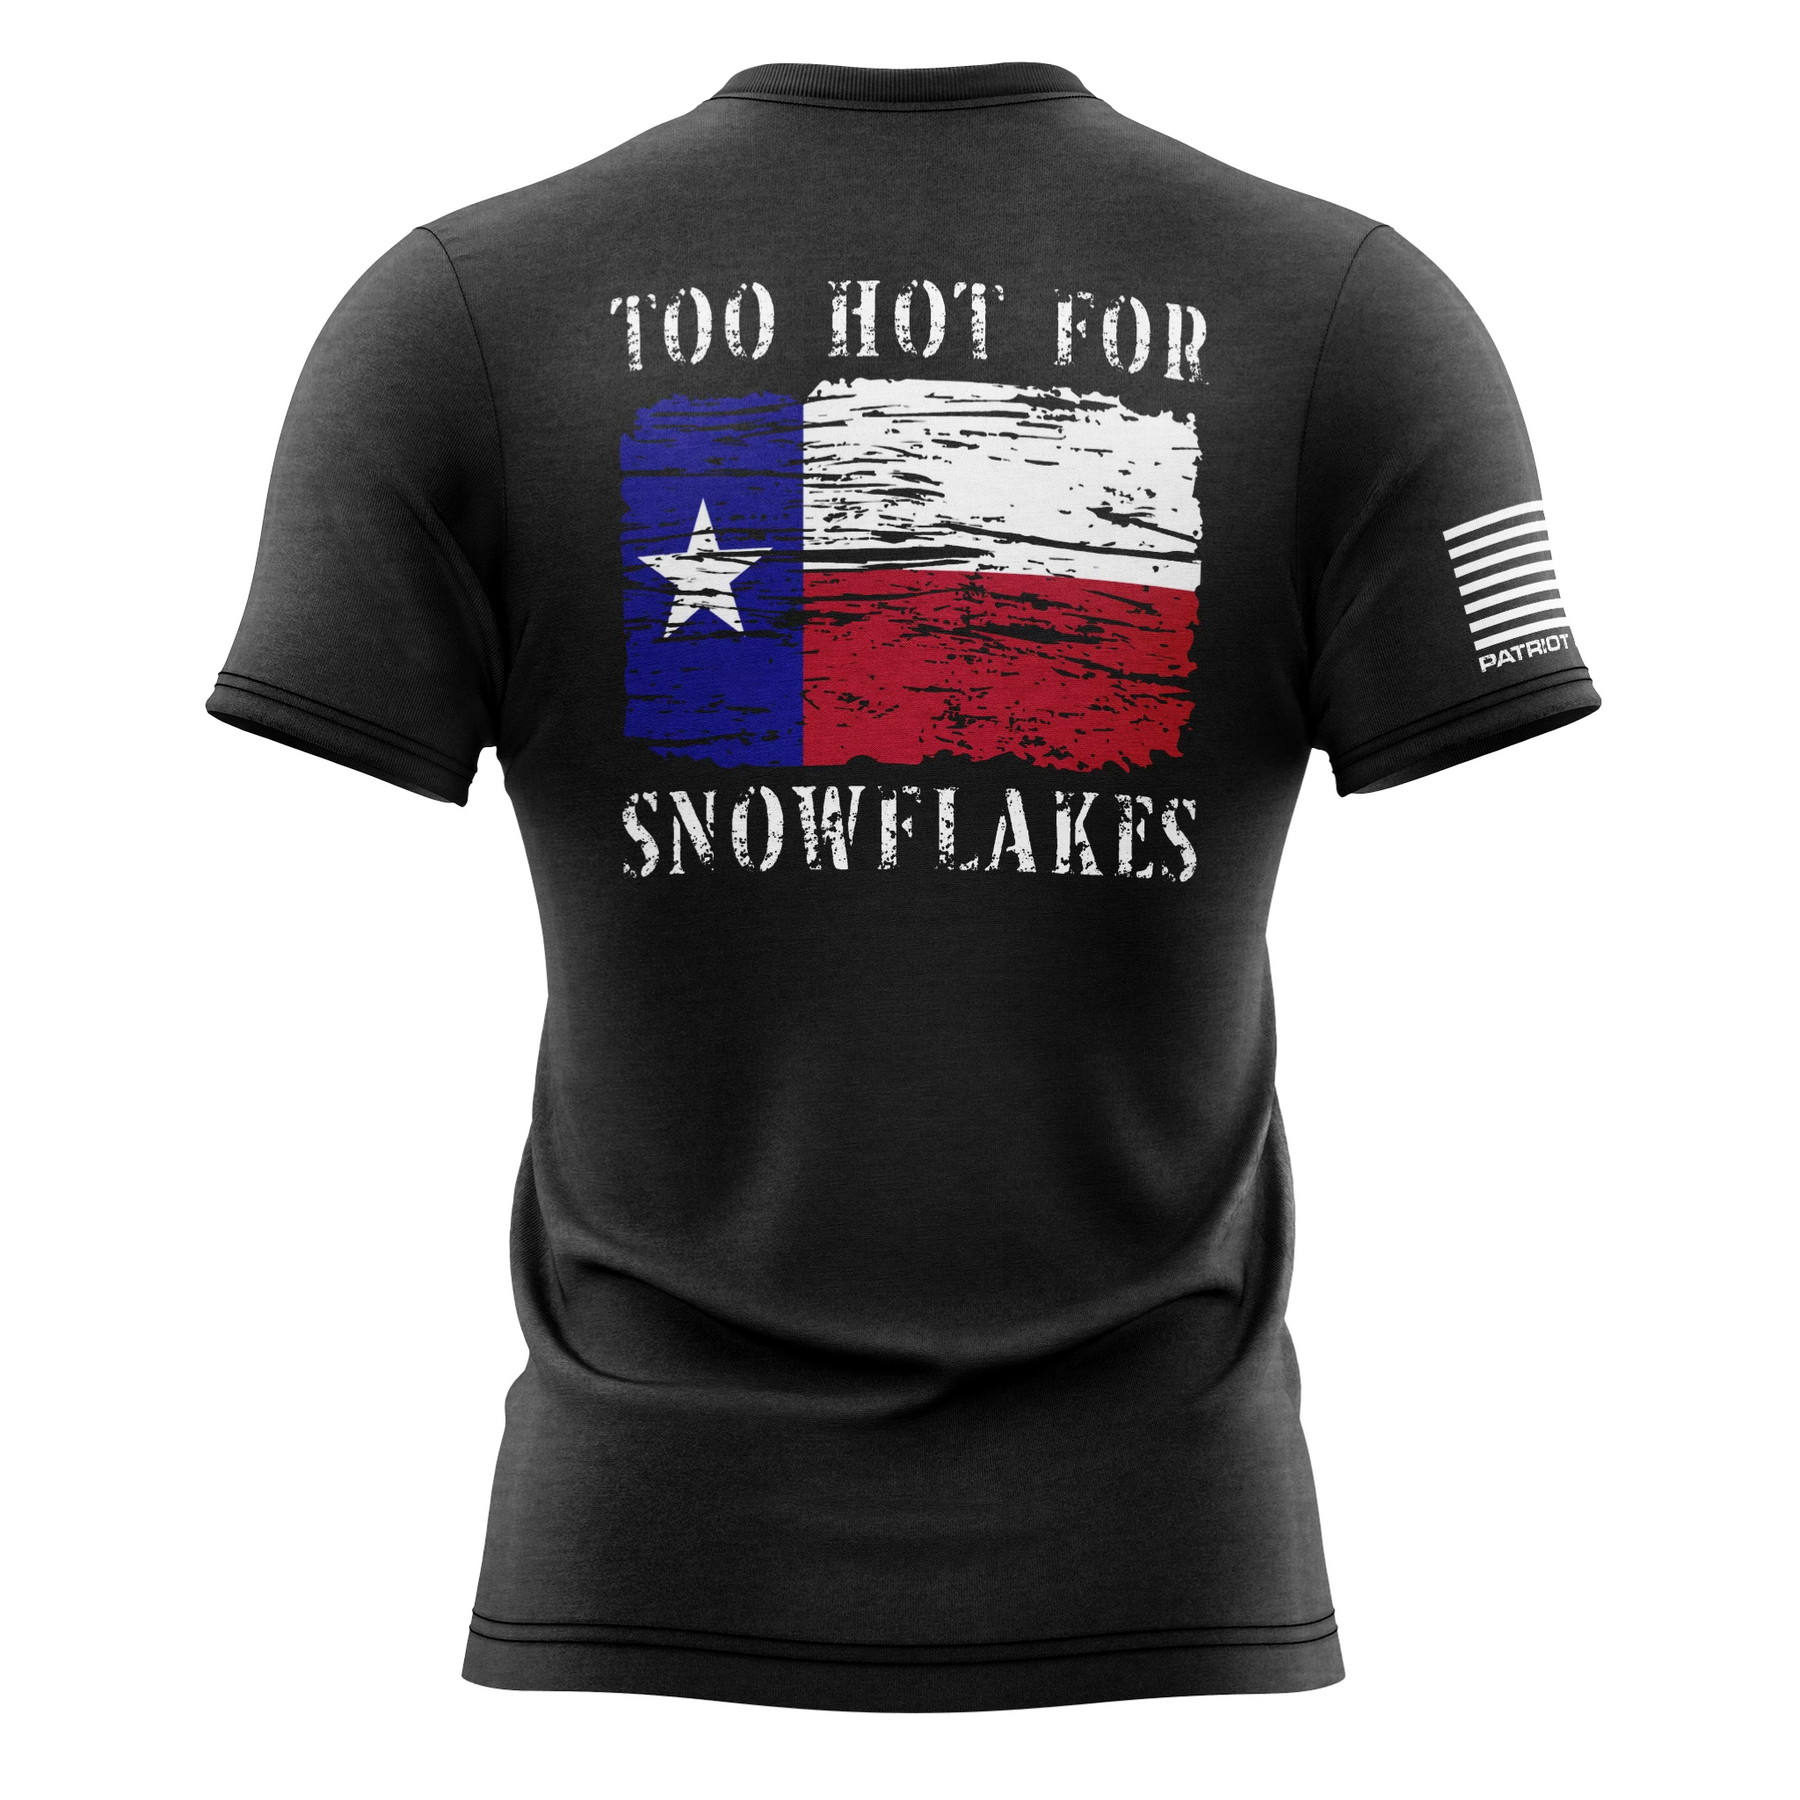 Too Hot For Snowflakes (Texas) T-Shirt